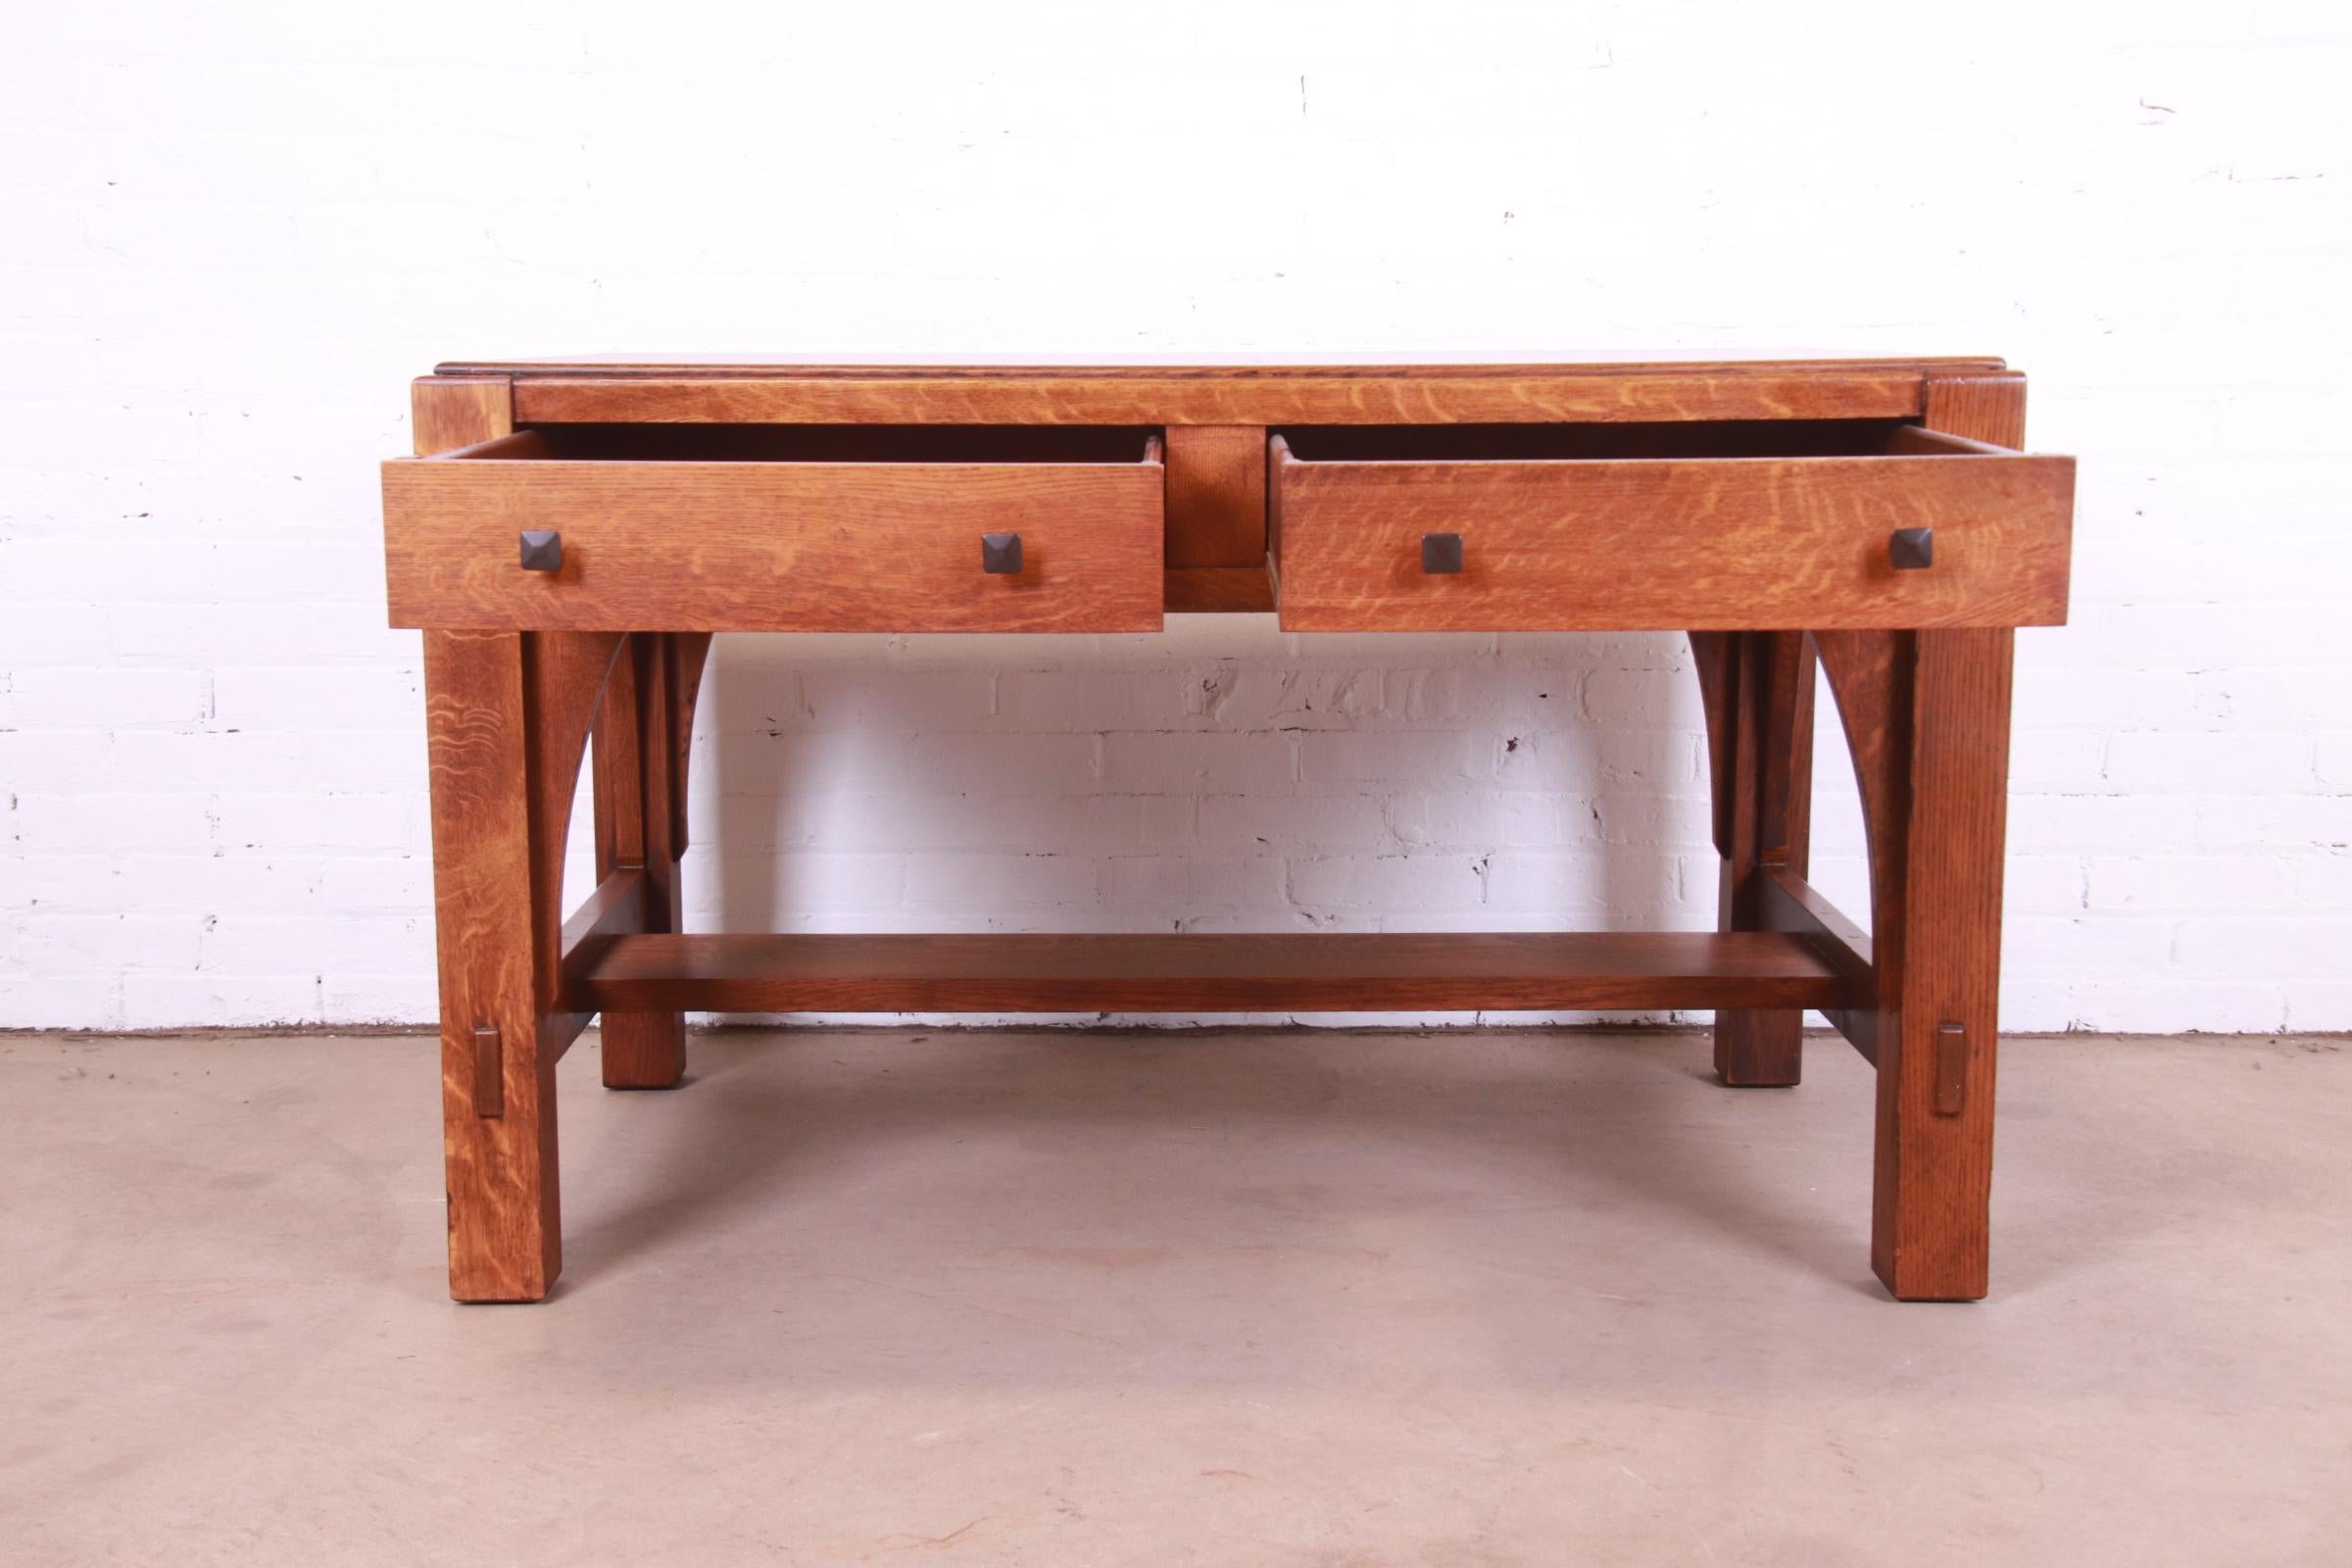 20th Century Limbert Mission Oak Arts & Crafts Desk or Library Table, Circa 1900